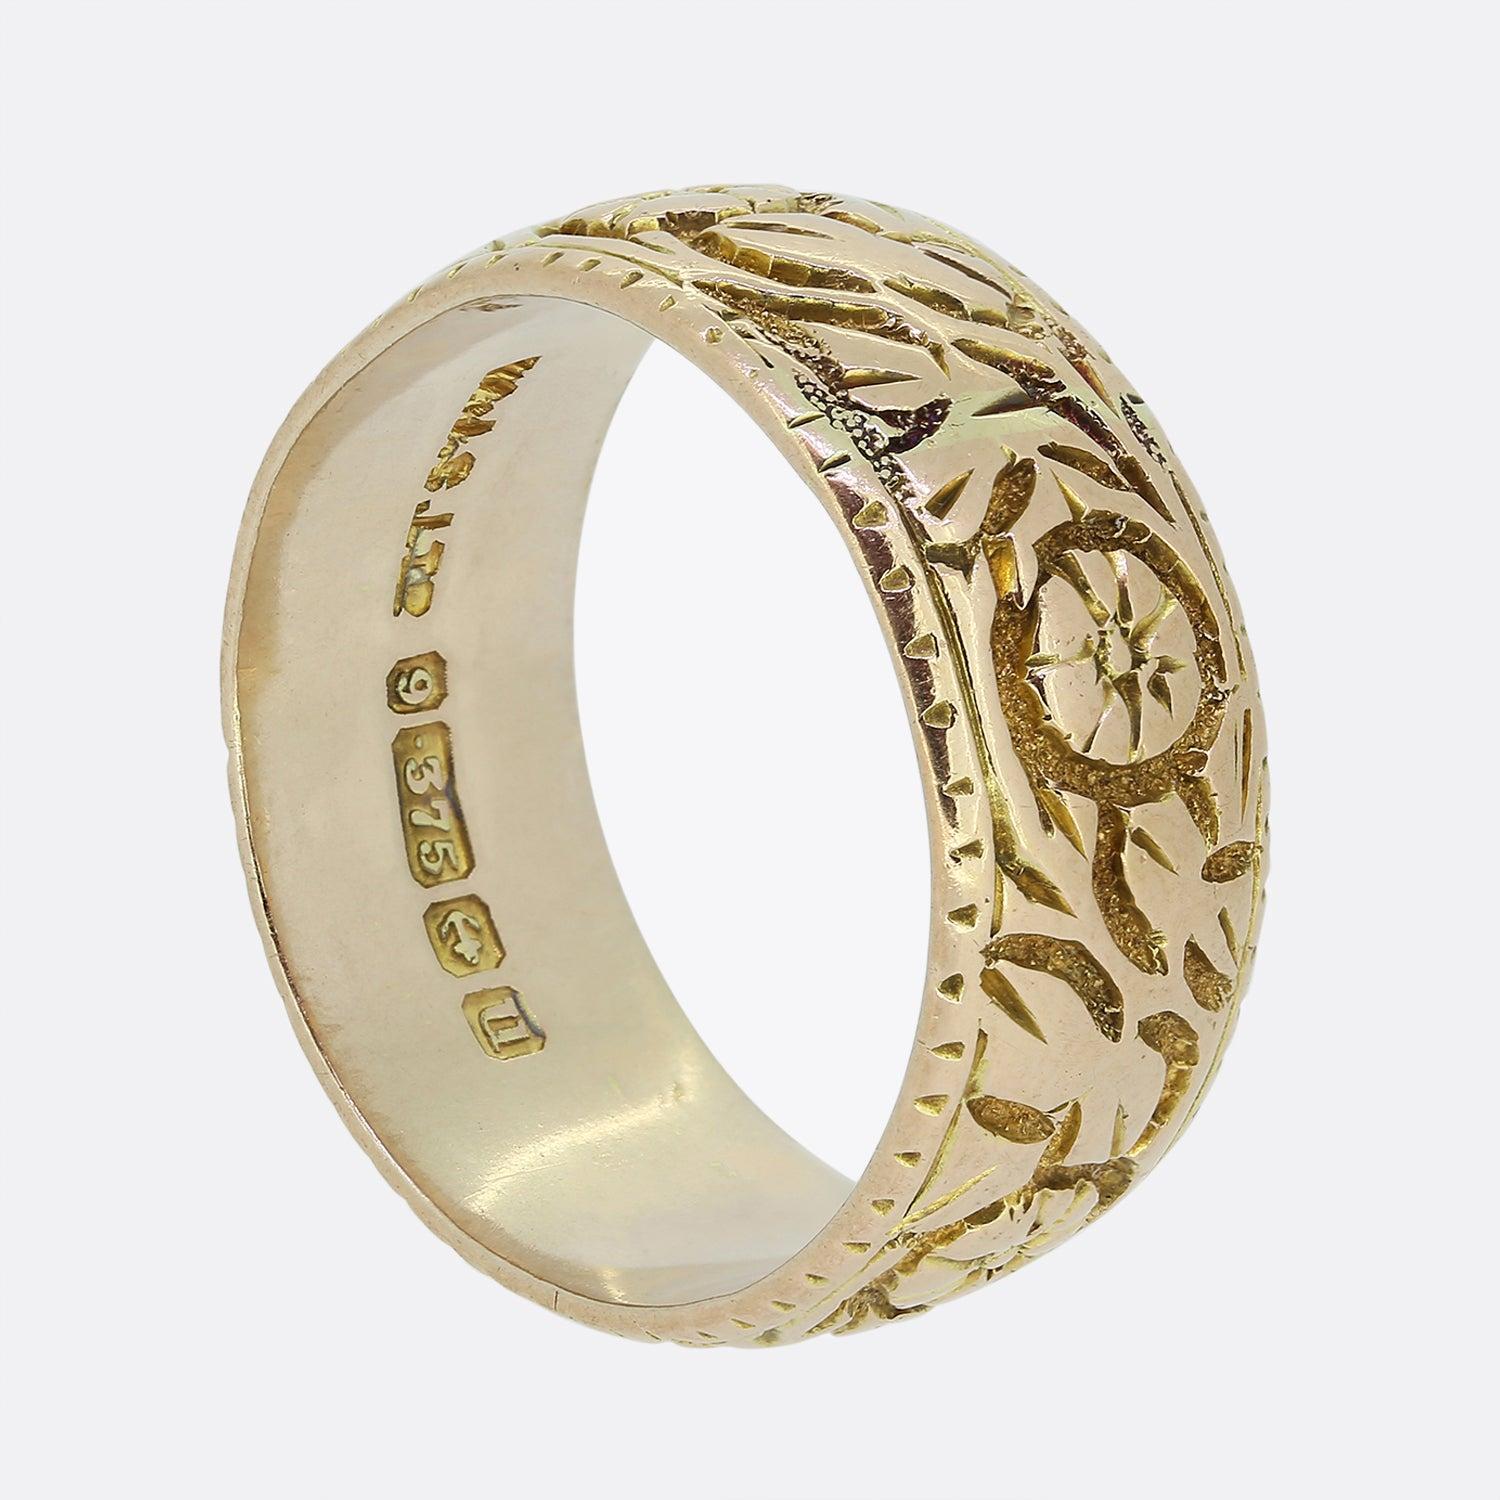 Here we have a classic 9ct rose gold ring showcasing a charming engraved foliated design around the entirety of the band. 

Condition: Used (Very Good)
Weight: 6.3 grams
Ring Size: P 1/2 (57)
Band Width: 8mm
Hallmarked: 9ct Gold Birmingham